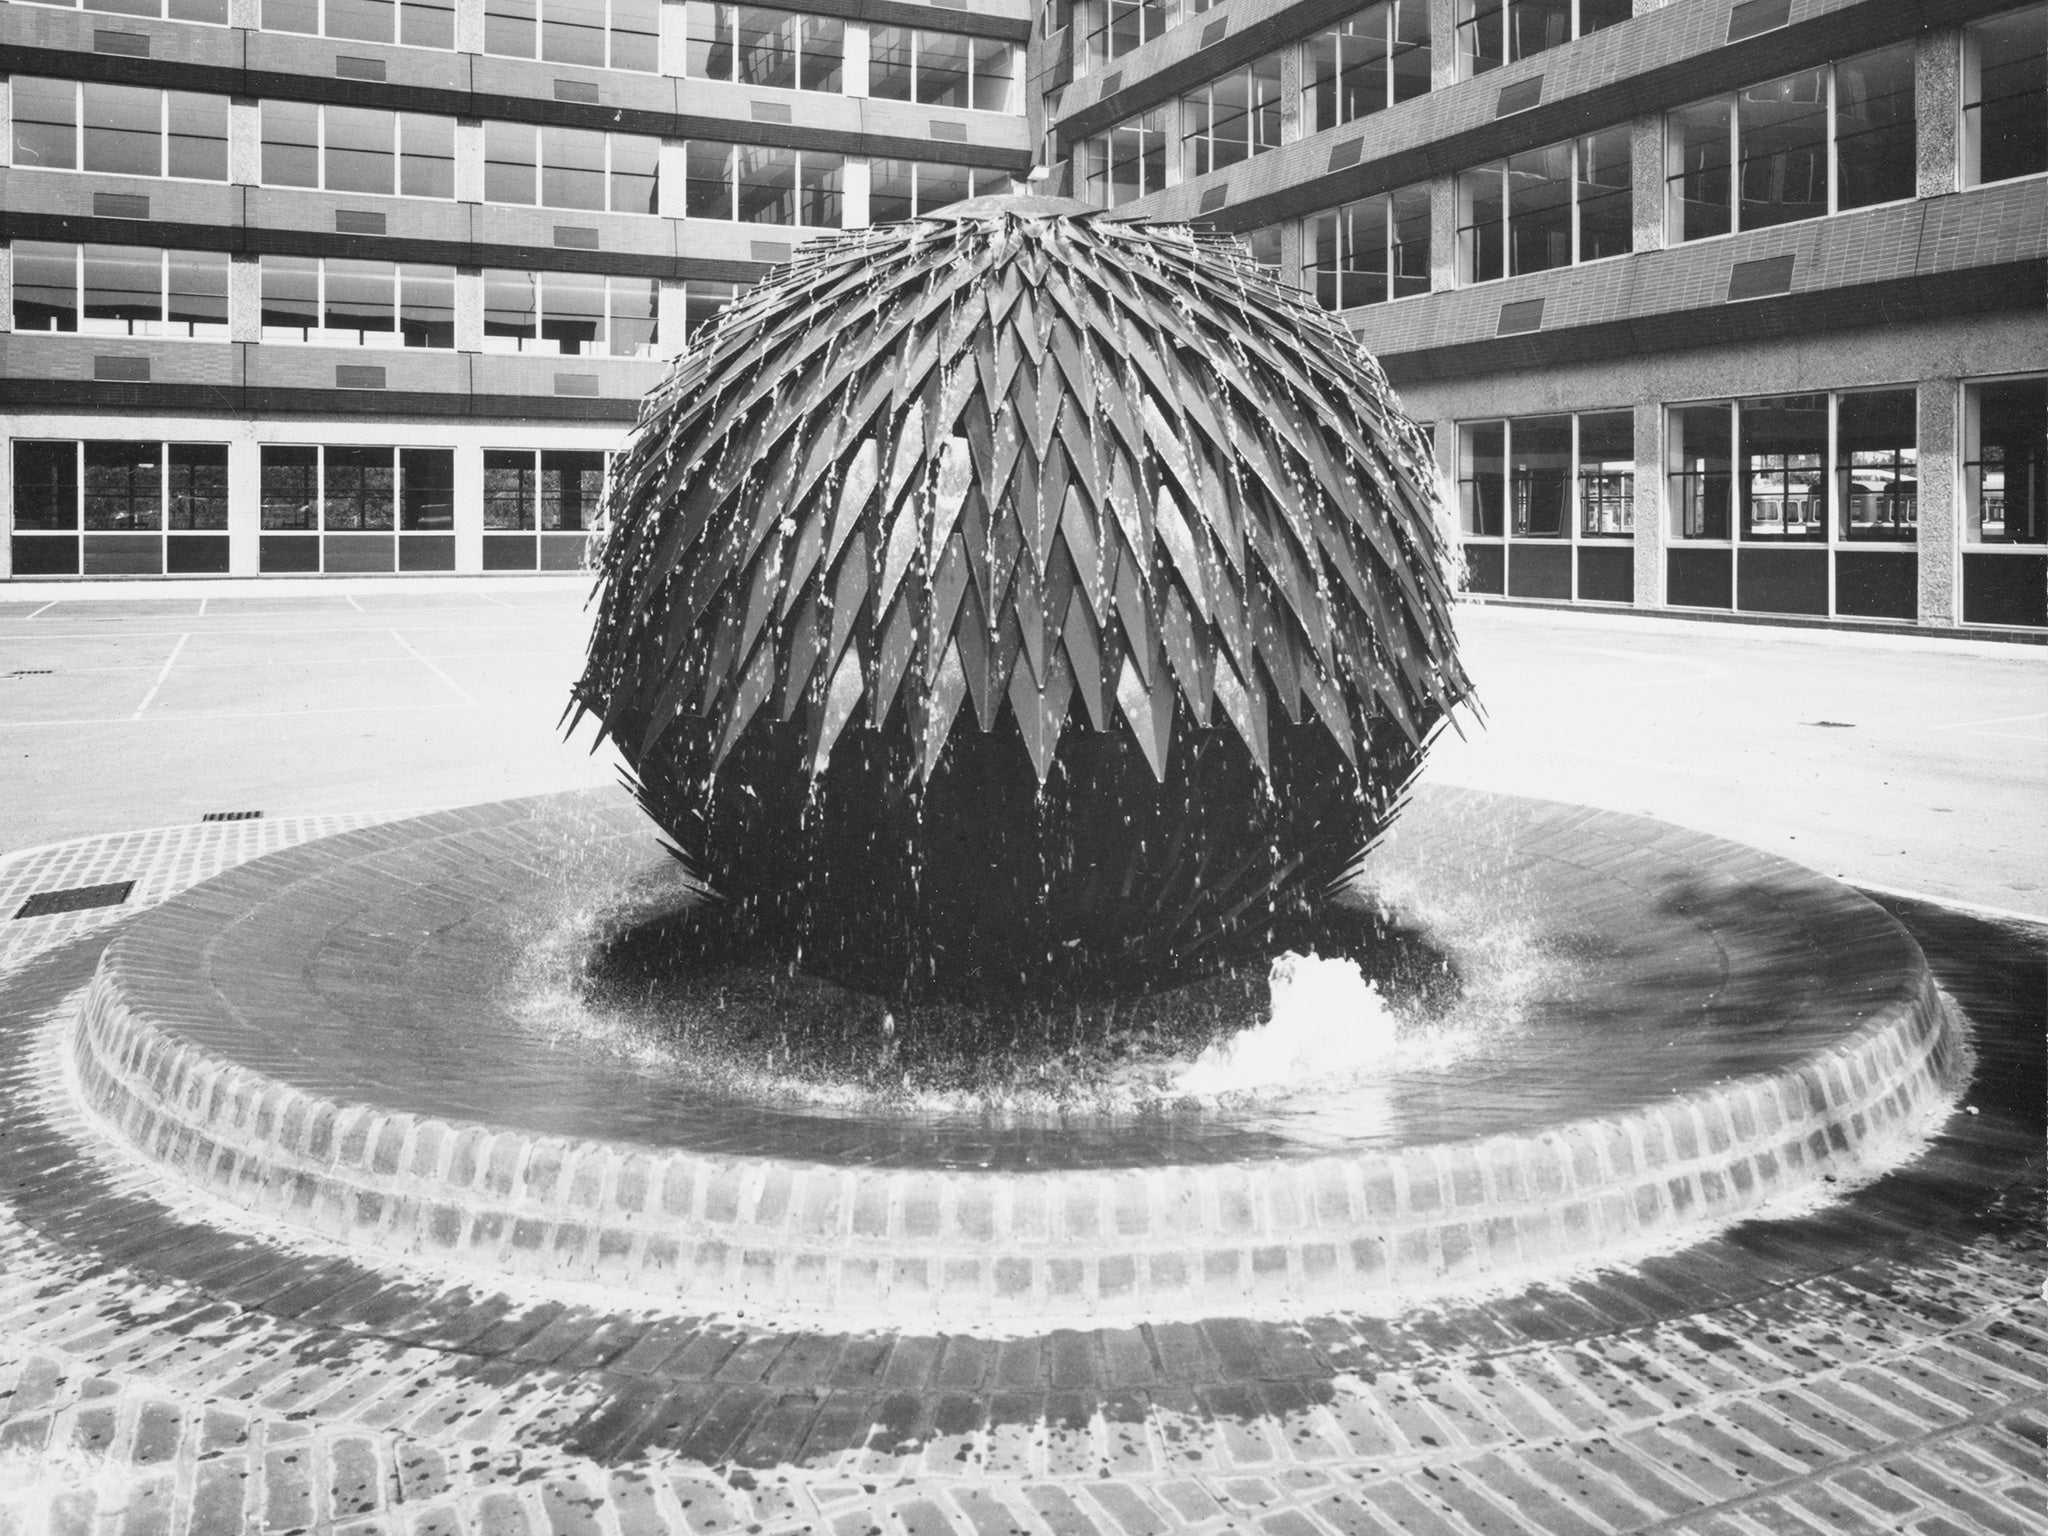 The Pineapple – William Mitchell, 1977: Commissioned by car maker Ford, the fountain was made from steel which had been hand cut and allowed to rust. It was installed outside a Ford building in Basildon but was last seen in 2011 when it was placed in storage. It was reported missing in 2012 and would cost ?500,000 to recreate today